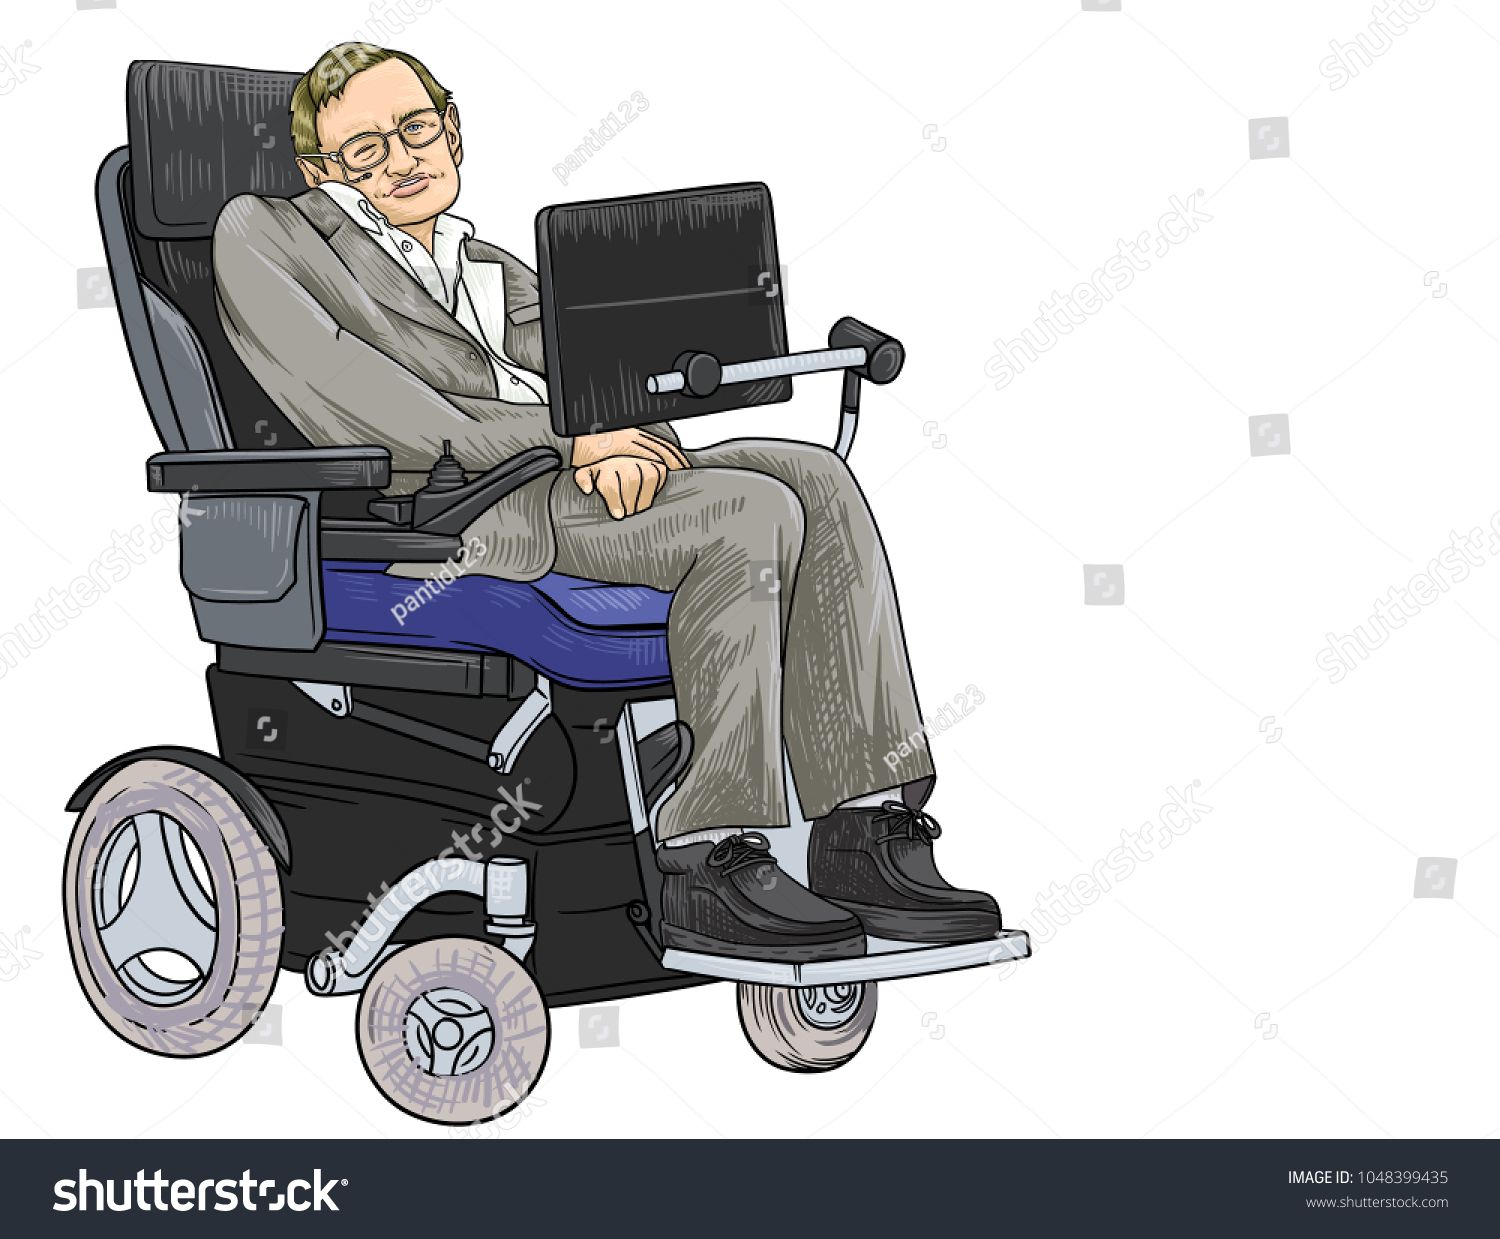 stock-vector-march-a-vector-illustration-of-a-portrait-of-stephen-hawking-1048399435.jpg